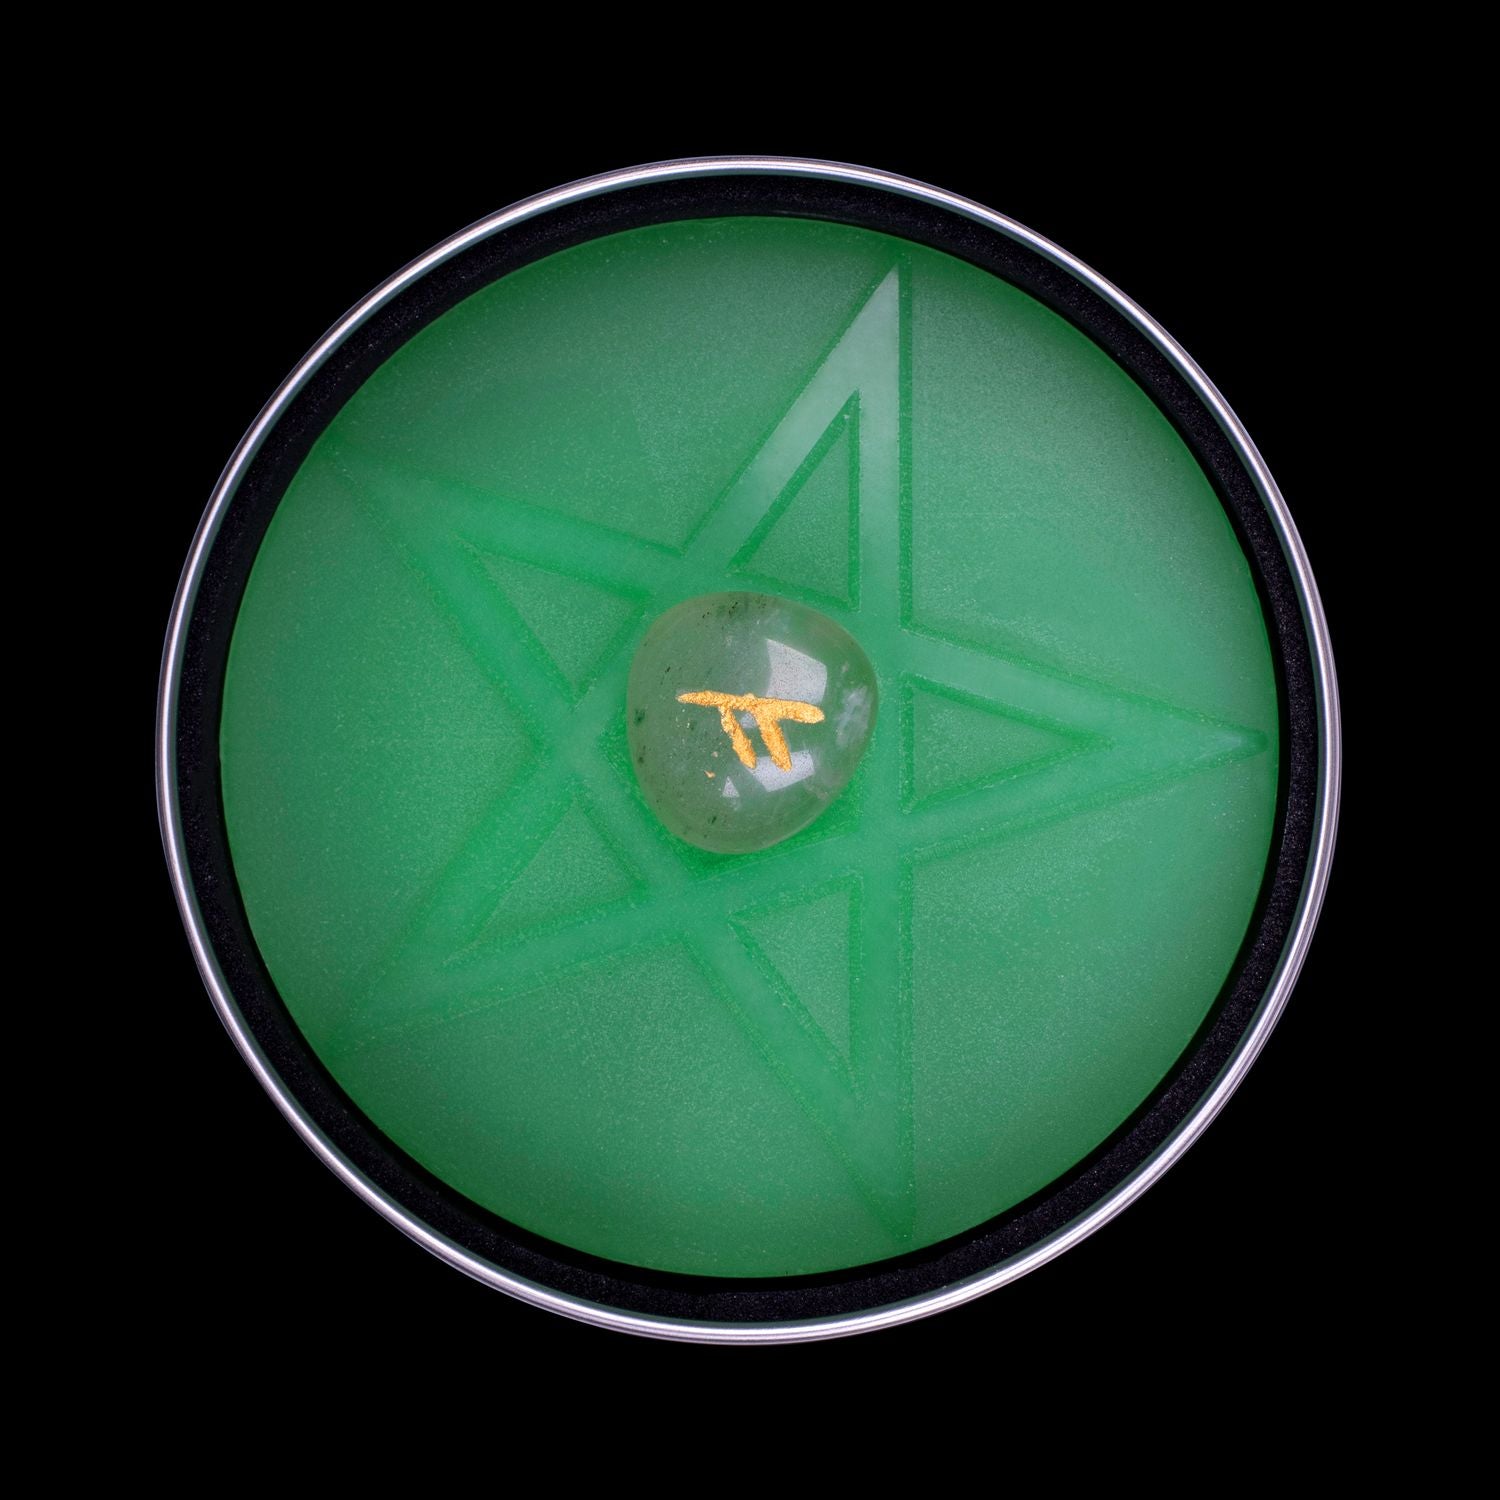 Inside View Of Green Plant-based Soap Featuring Spell Casting Pentagon & Aventurine Crystal Rune. Naturally Wicked Fortune Soap For The Explorer Scented With Jungle Juice